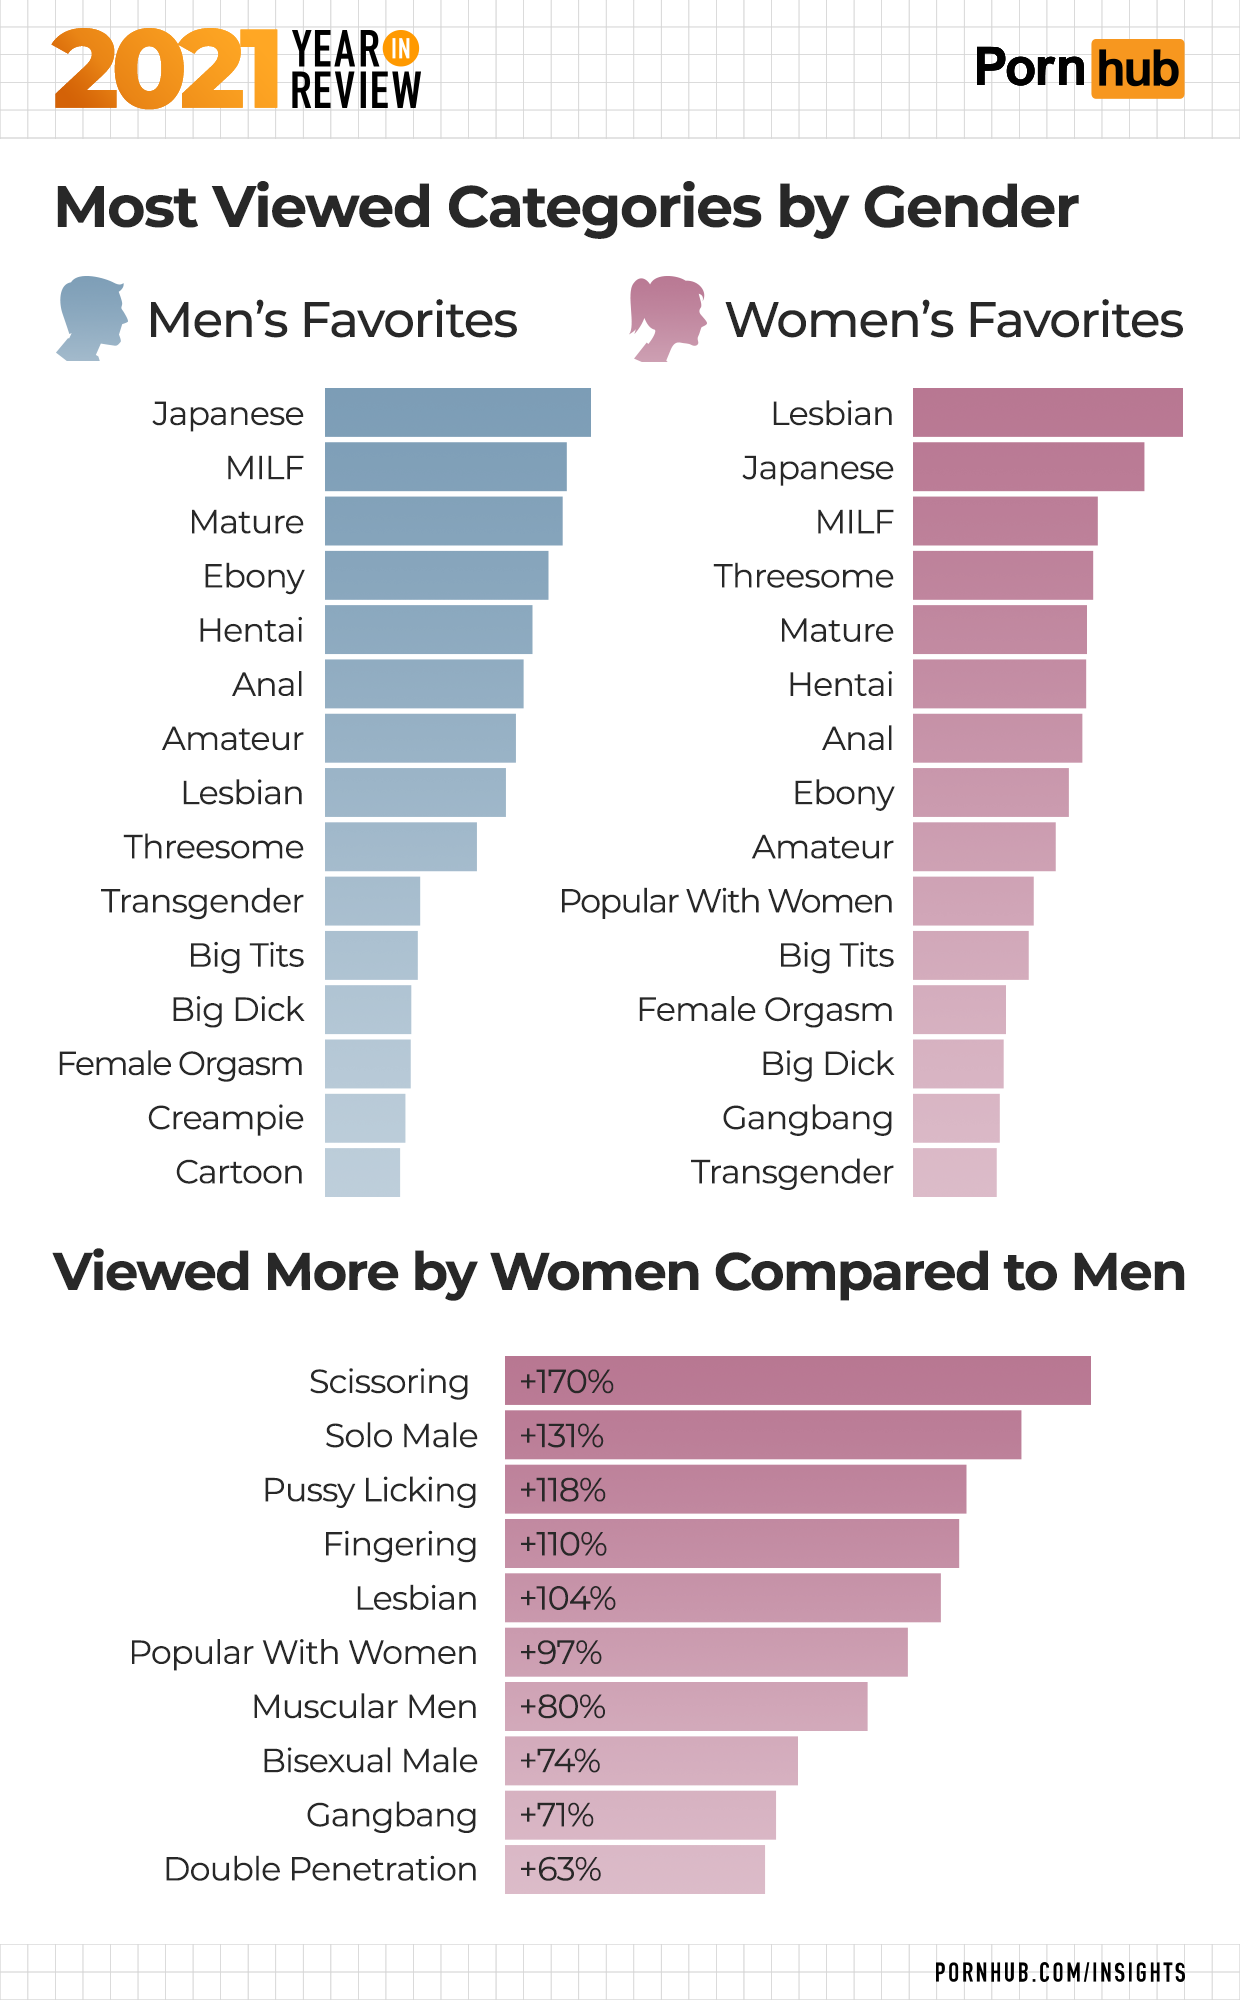 1-pornhub-insights-2021-year-in-review-gender-categories.png